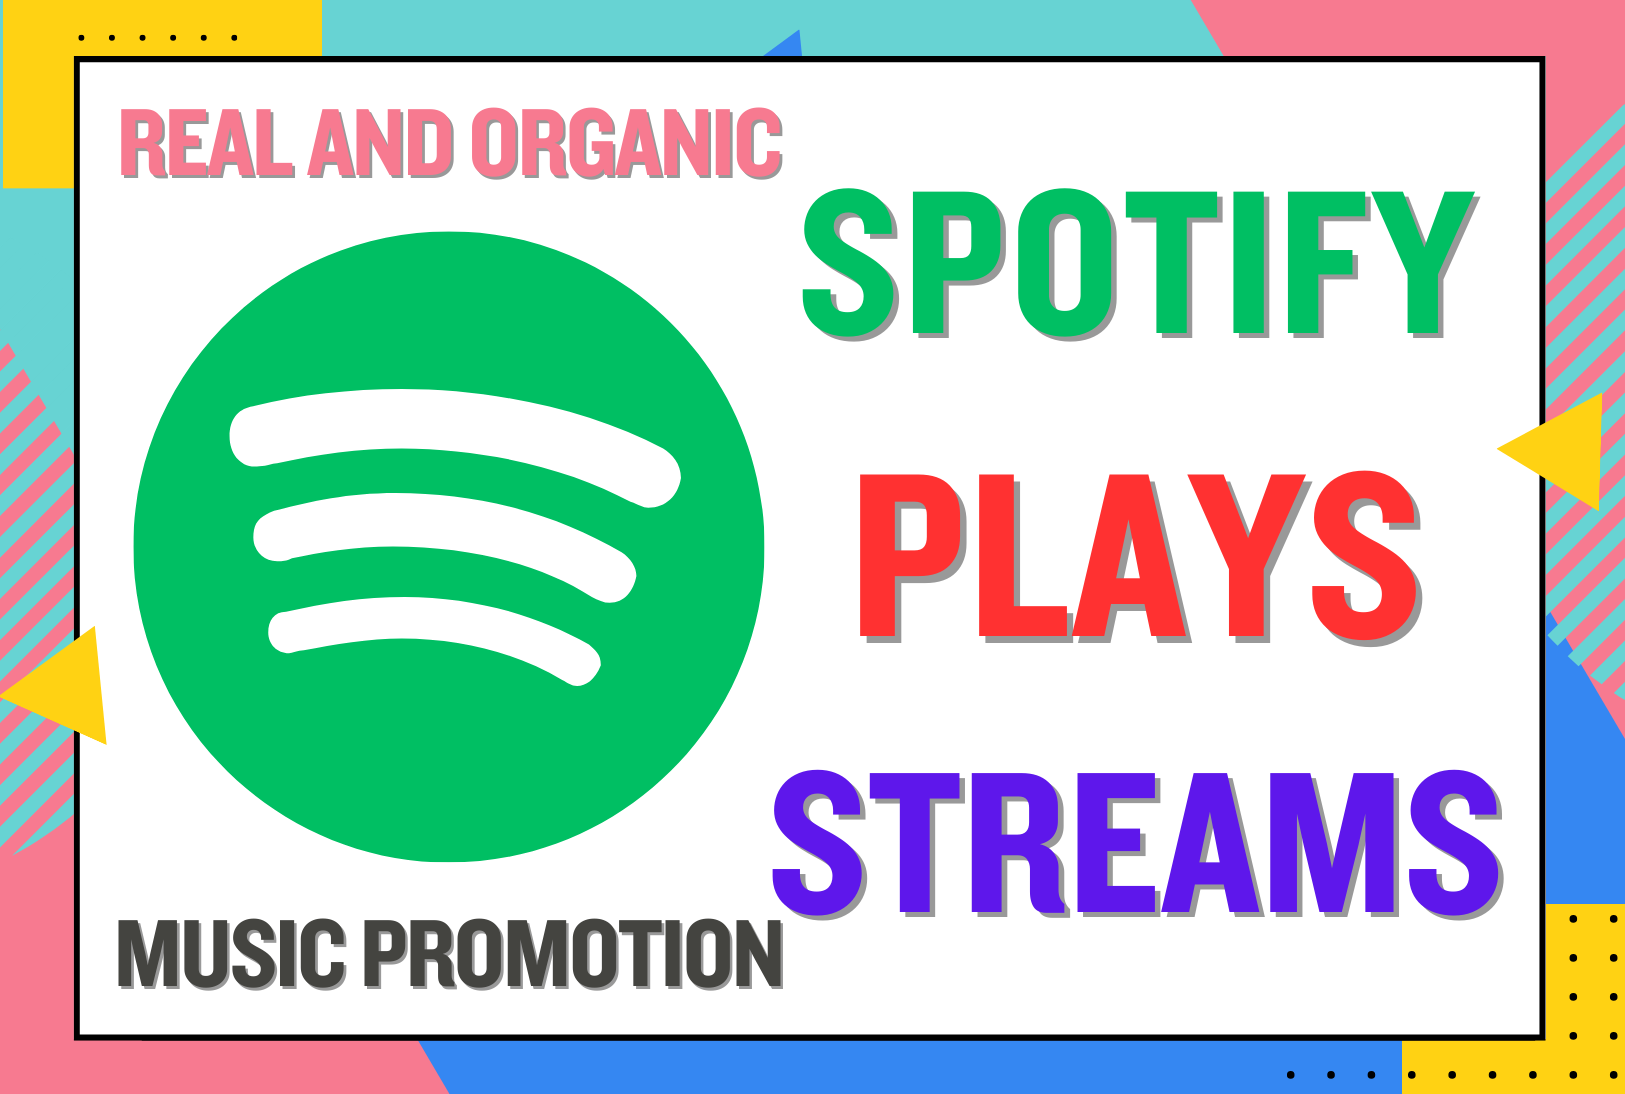 1000 Spotify plays streams | Promote your Spotify music and make it viral